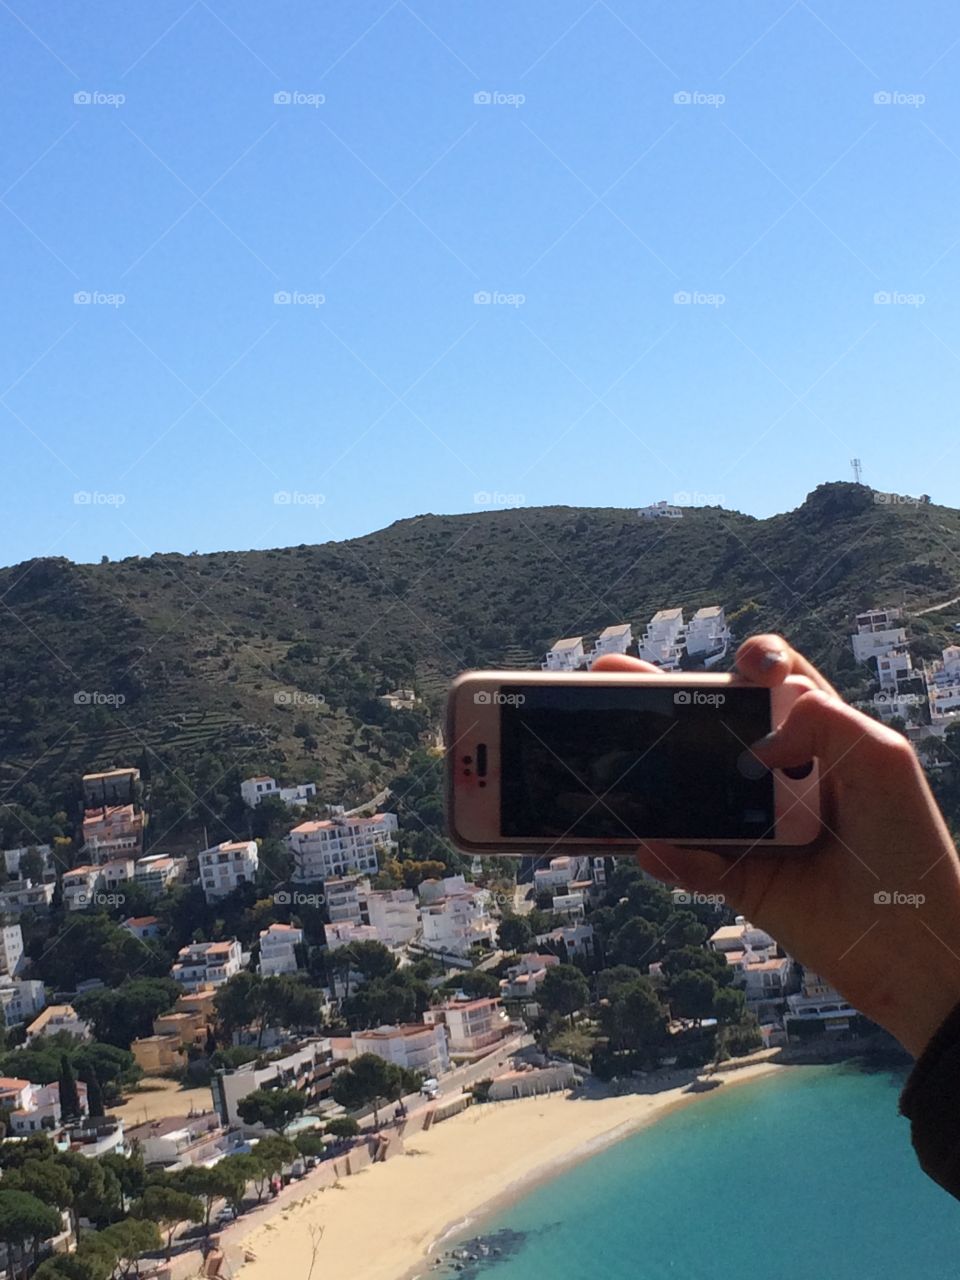 This is the beautiful landscape of Spain which someone taking a photo in it. I think that it looks very modern but beautiful. This would be a perfect screensaver or picture in a modern holiday home because it captures the landscape and the modern tec